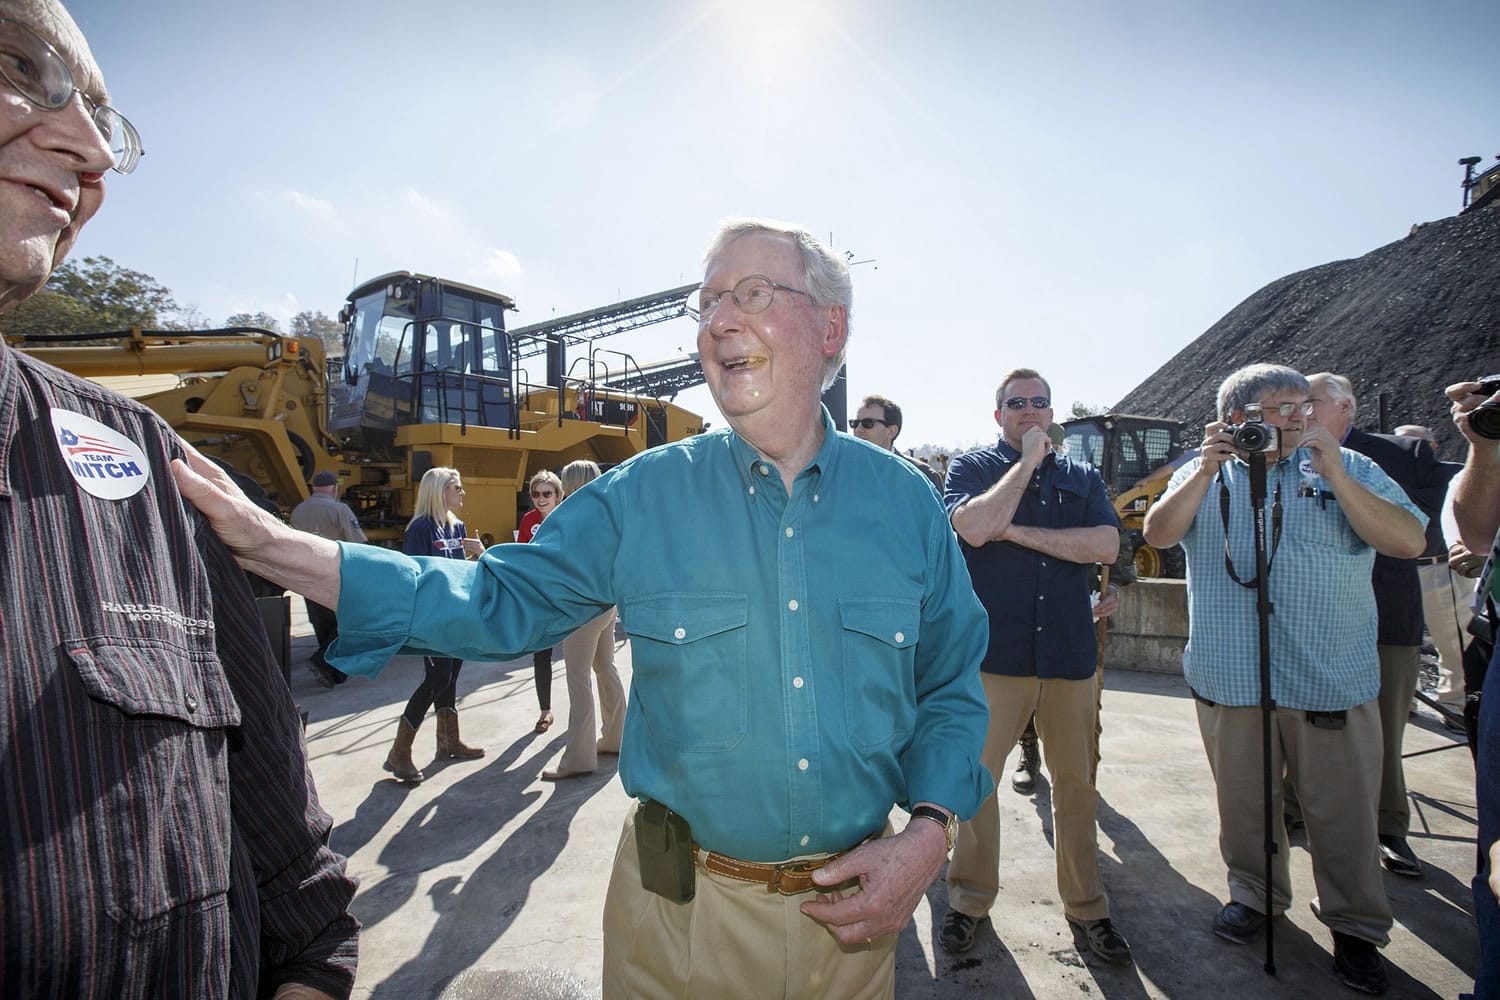 Senate Minority Leader Mitch McConnell of Kentucky, a 30-year incumbent, greets people Monday at a coal tipple operation in Manchester, Ky.